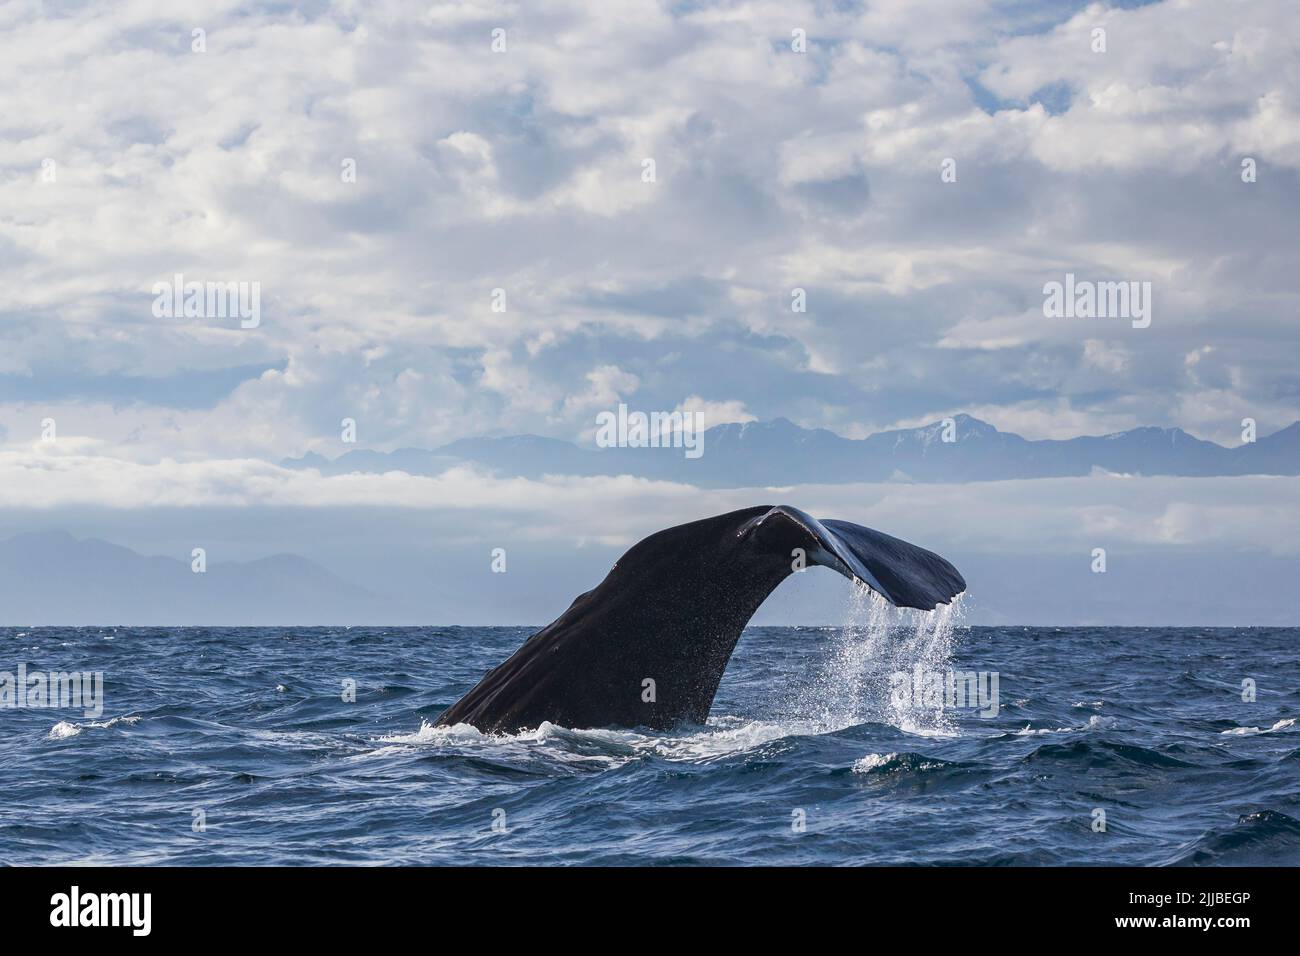 Sperm whale Physeter macrocephalus, adult male, diving with distant mountains in background, off the coast of Kaikoura, New Zealand in November. Stock Photo